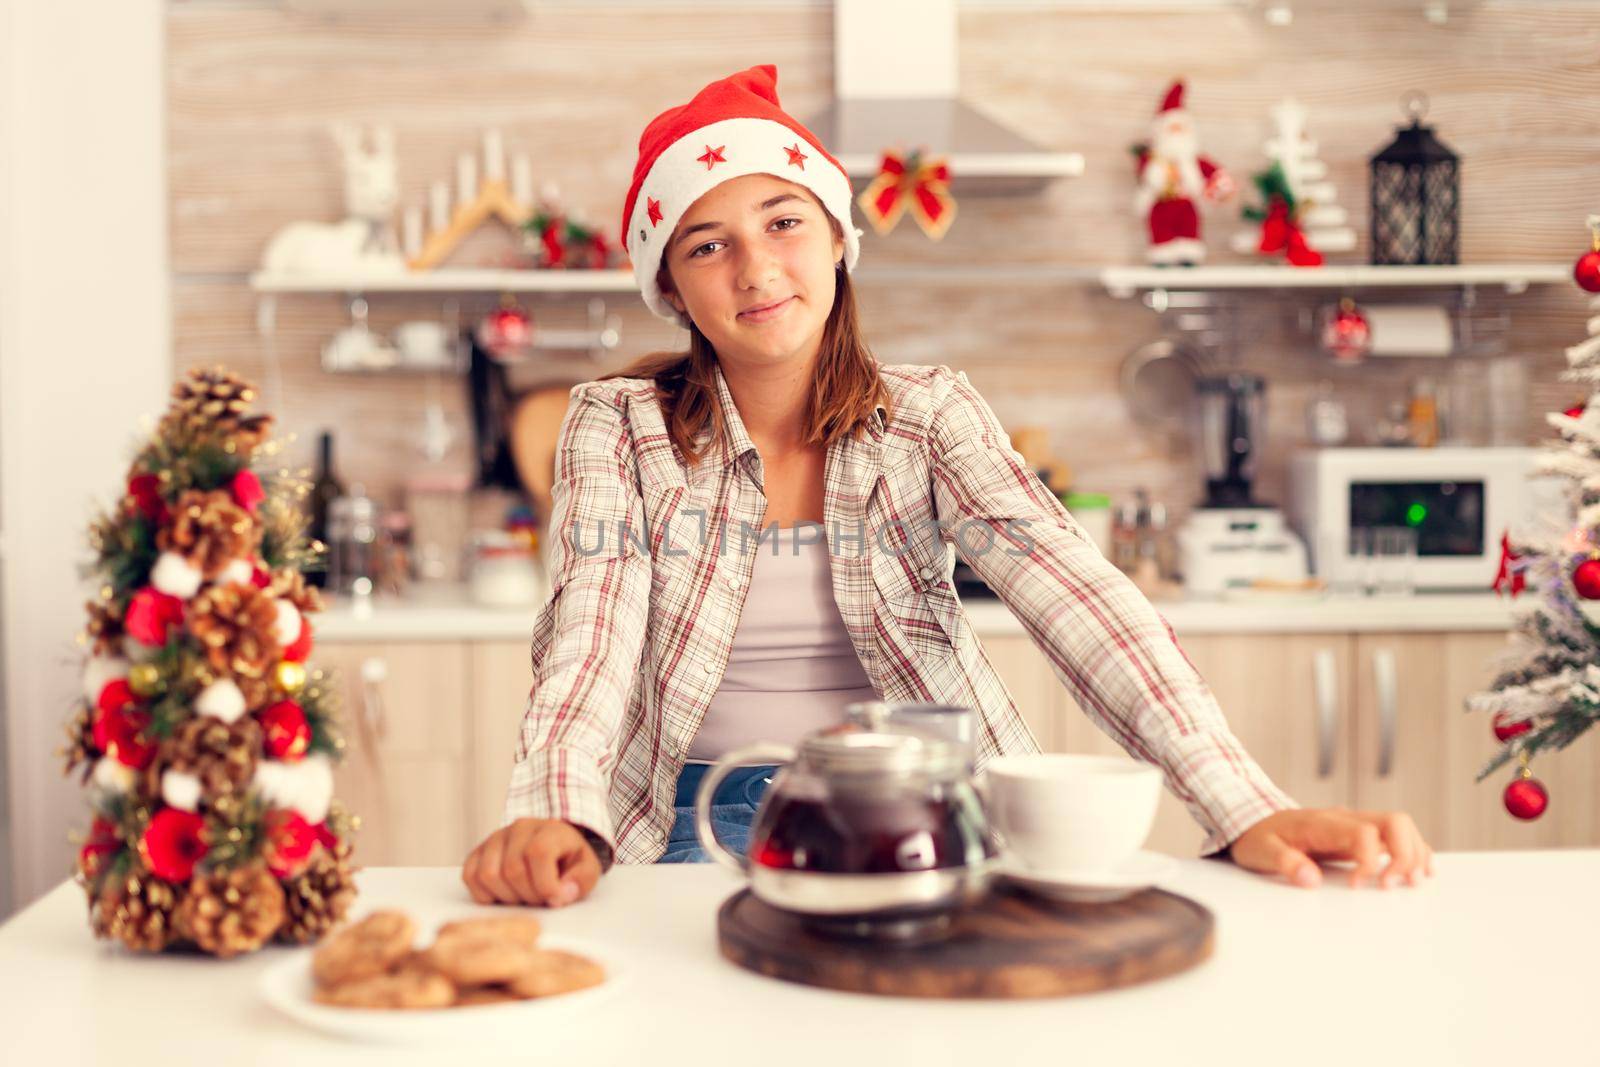 Joyful girl wearing santa heat celebrating christmas in kitchen. Cheerful happy adorable teenager girl in home kitchen with delicious biscuits and xmas tree in the background celebrating winter holiday.